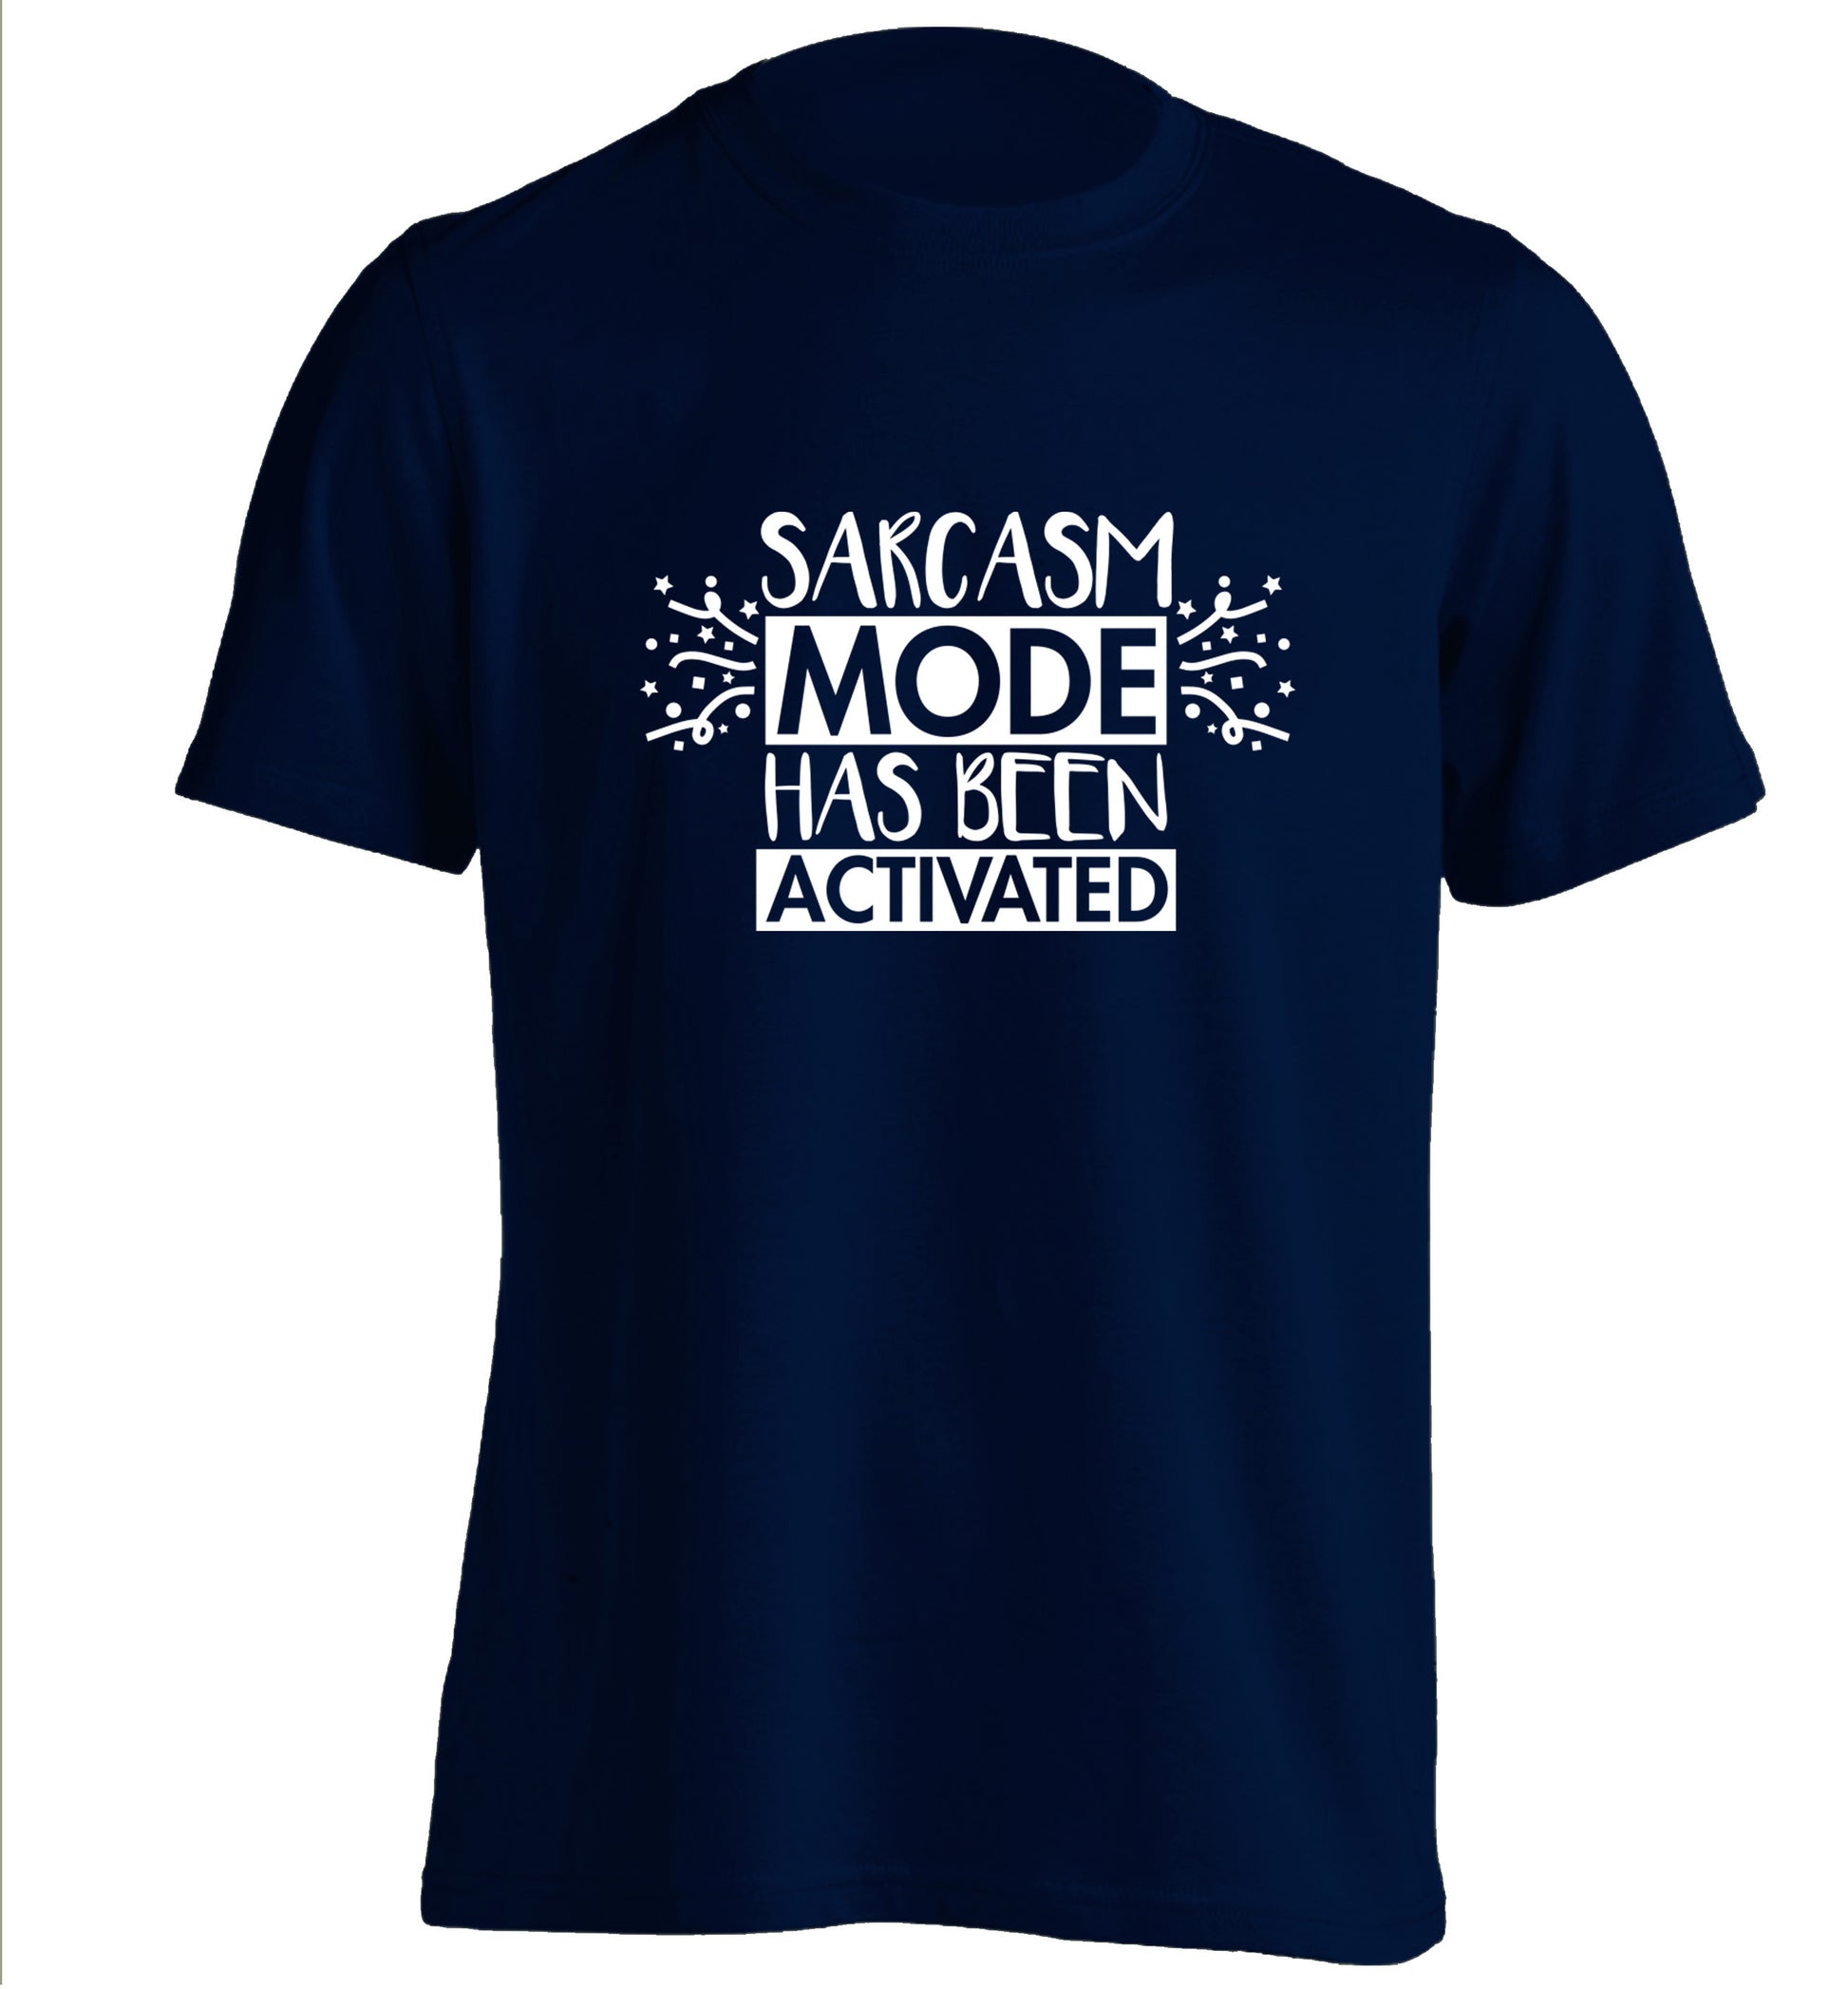 Sarcarsm mode has been activated adults unisex navy Tshirt 2XL